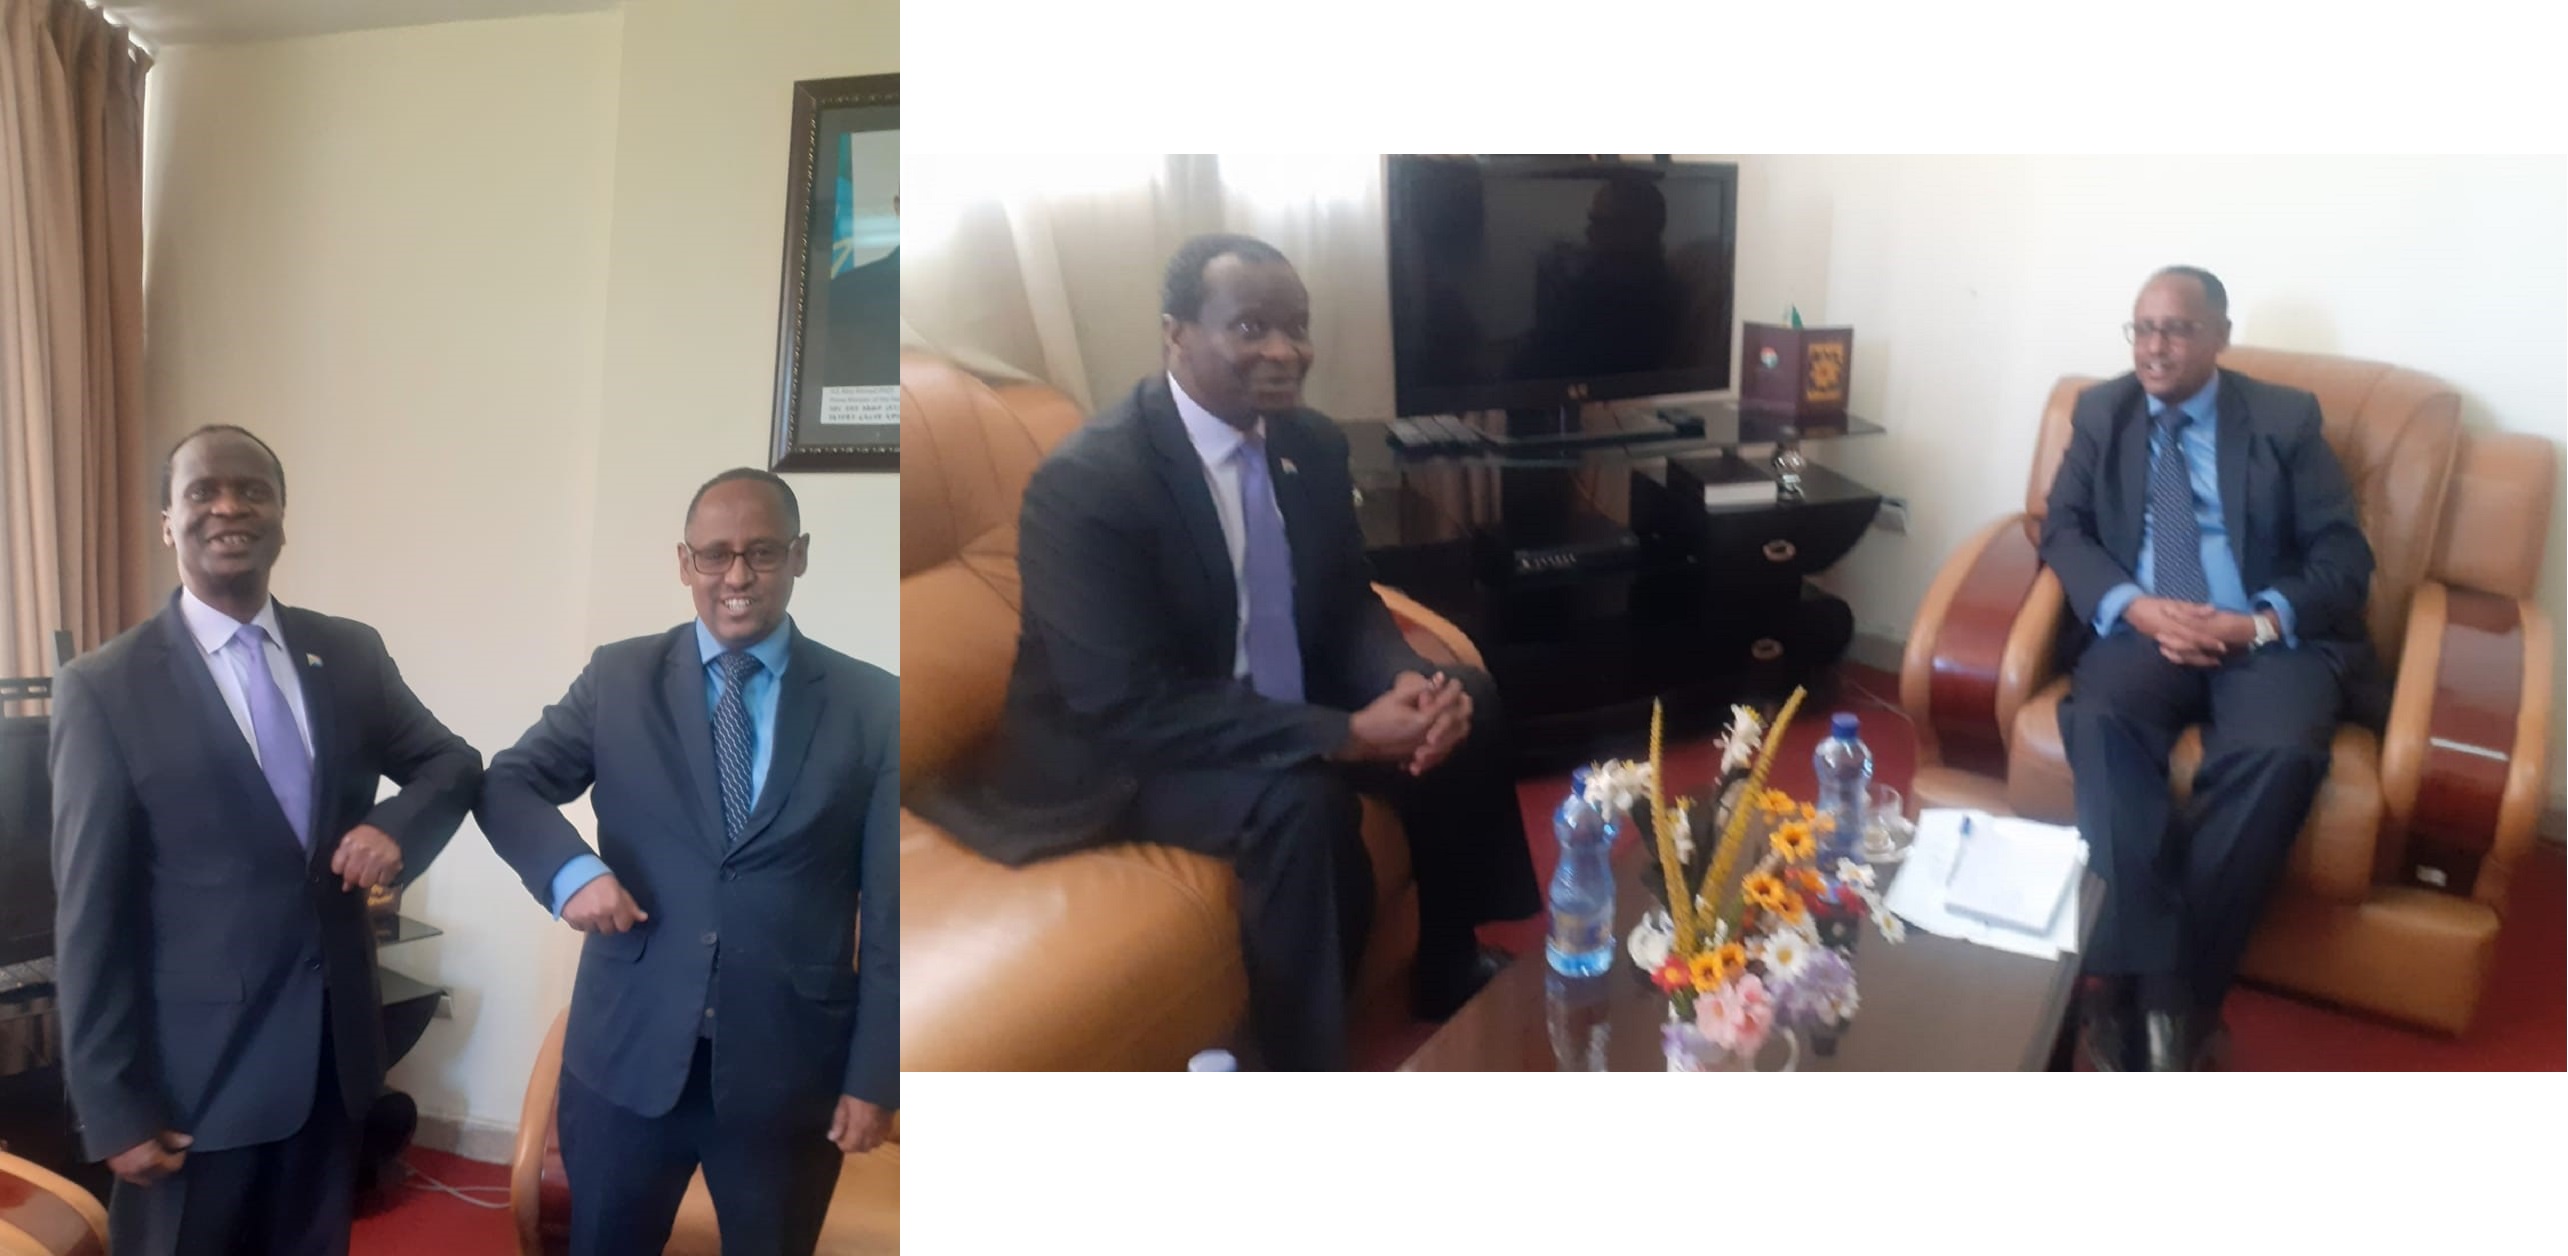 On17November2021_H_E_Ambassador_Makaya_had_a_meeting_with_Mr_Aklilu_Kebede_the_Director_General_for_the_Northern_Western_Central_and_Southern_African_Affairs_at_ the_Ministry_of_Foreign_Affairs